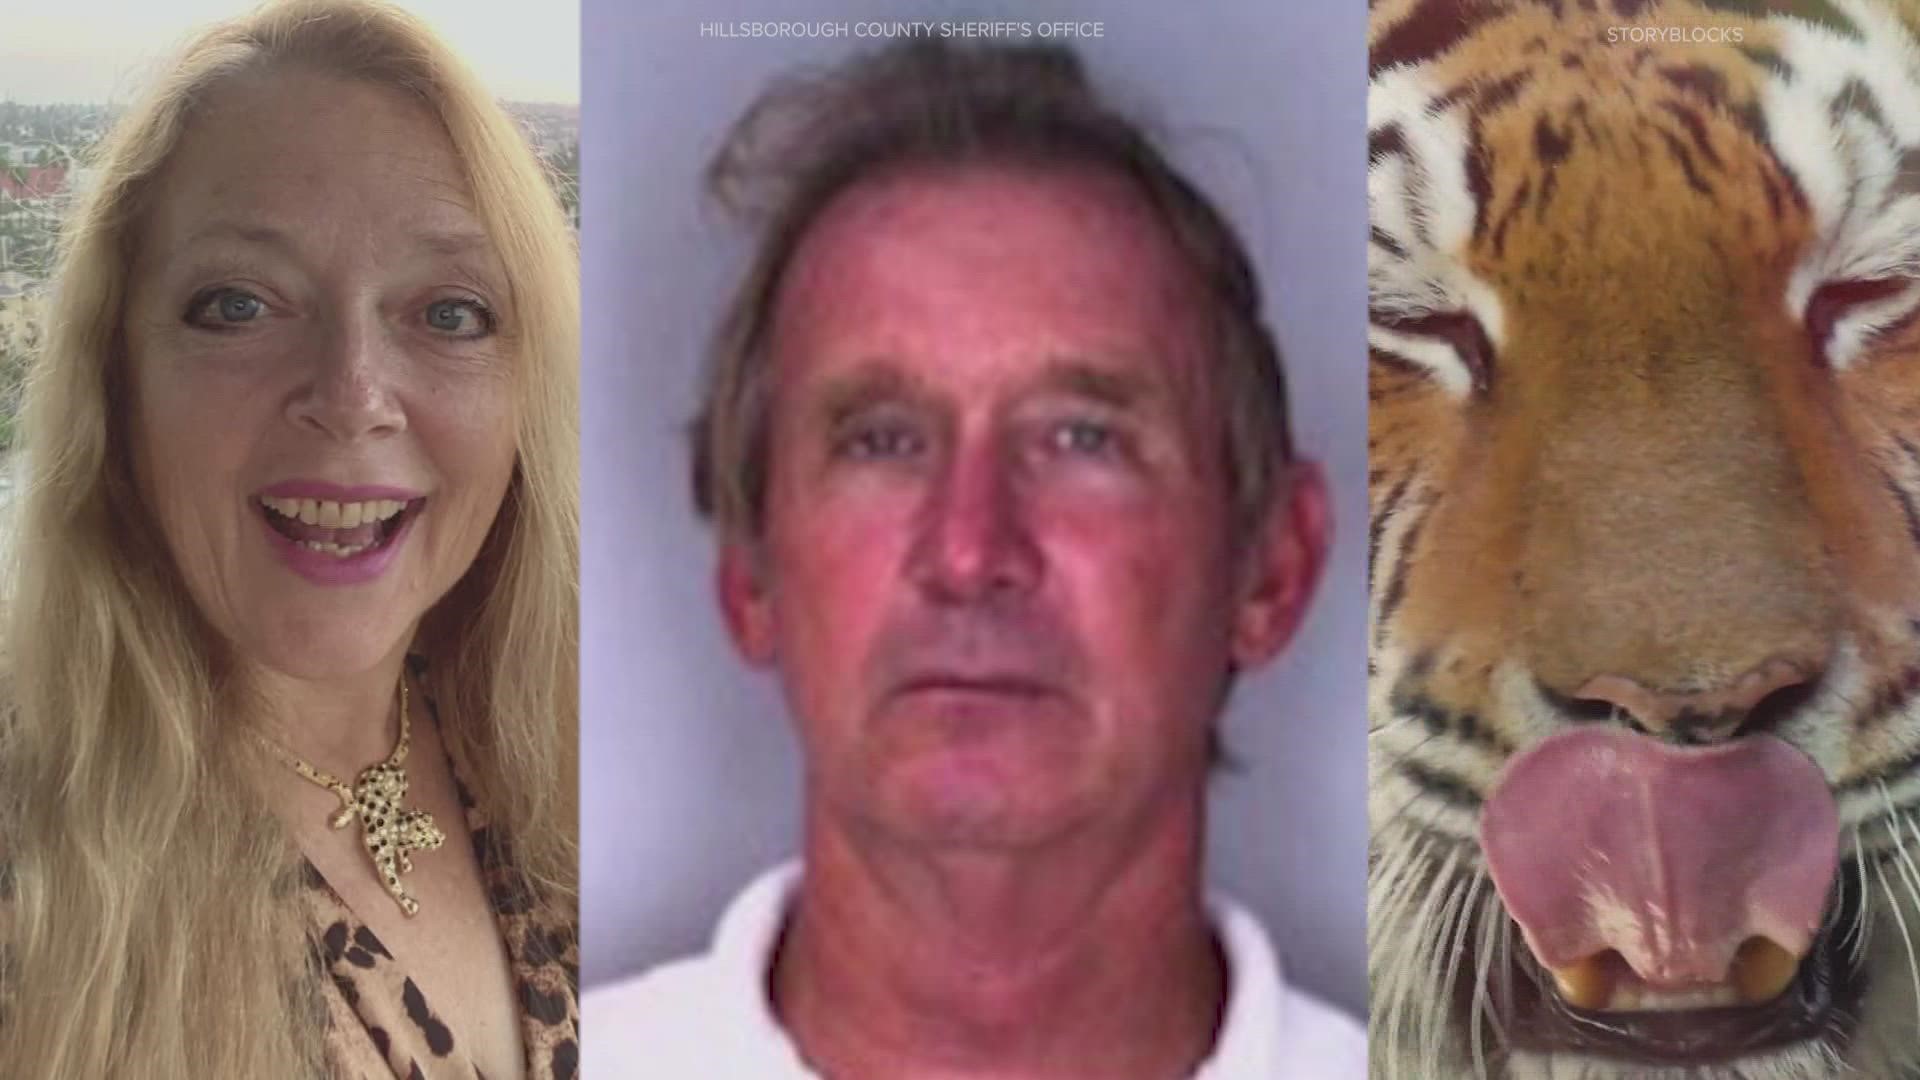 A 2021 interview in which “Tiger King” star Carole Baskin claimed her husband was found alive in Costa Rica recently resurfaced. Police say he’s still missing.